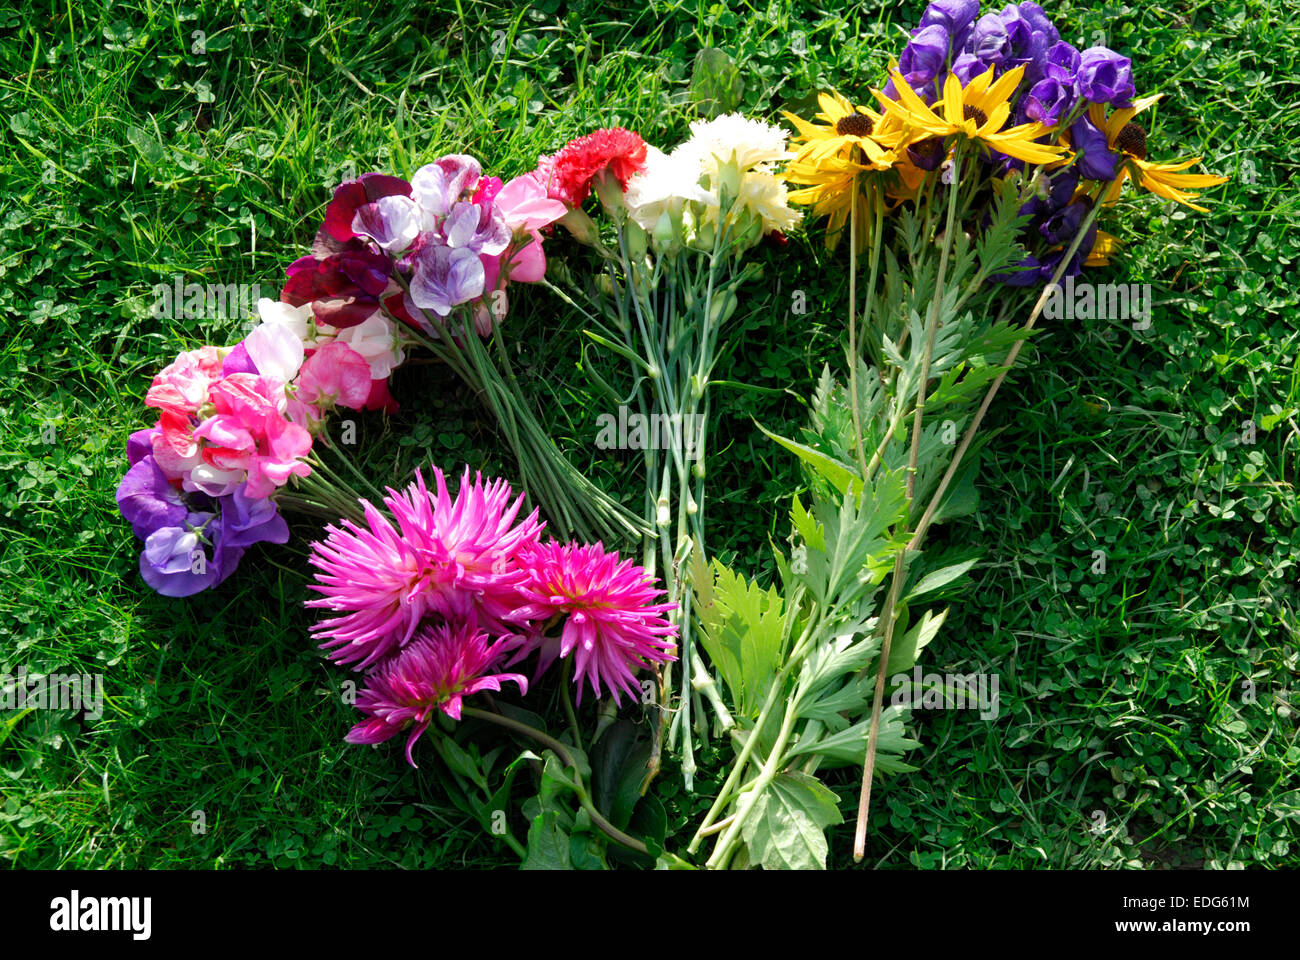 Bunch of flowers on green grass background, includes dalias sweet peas black-eyed susan Stock Photo